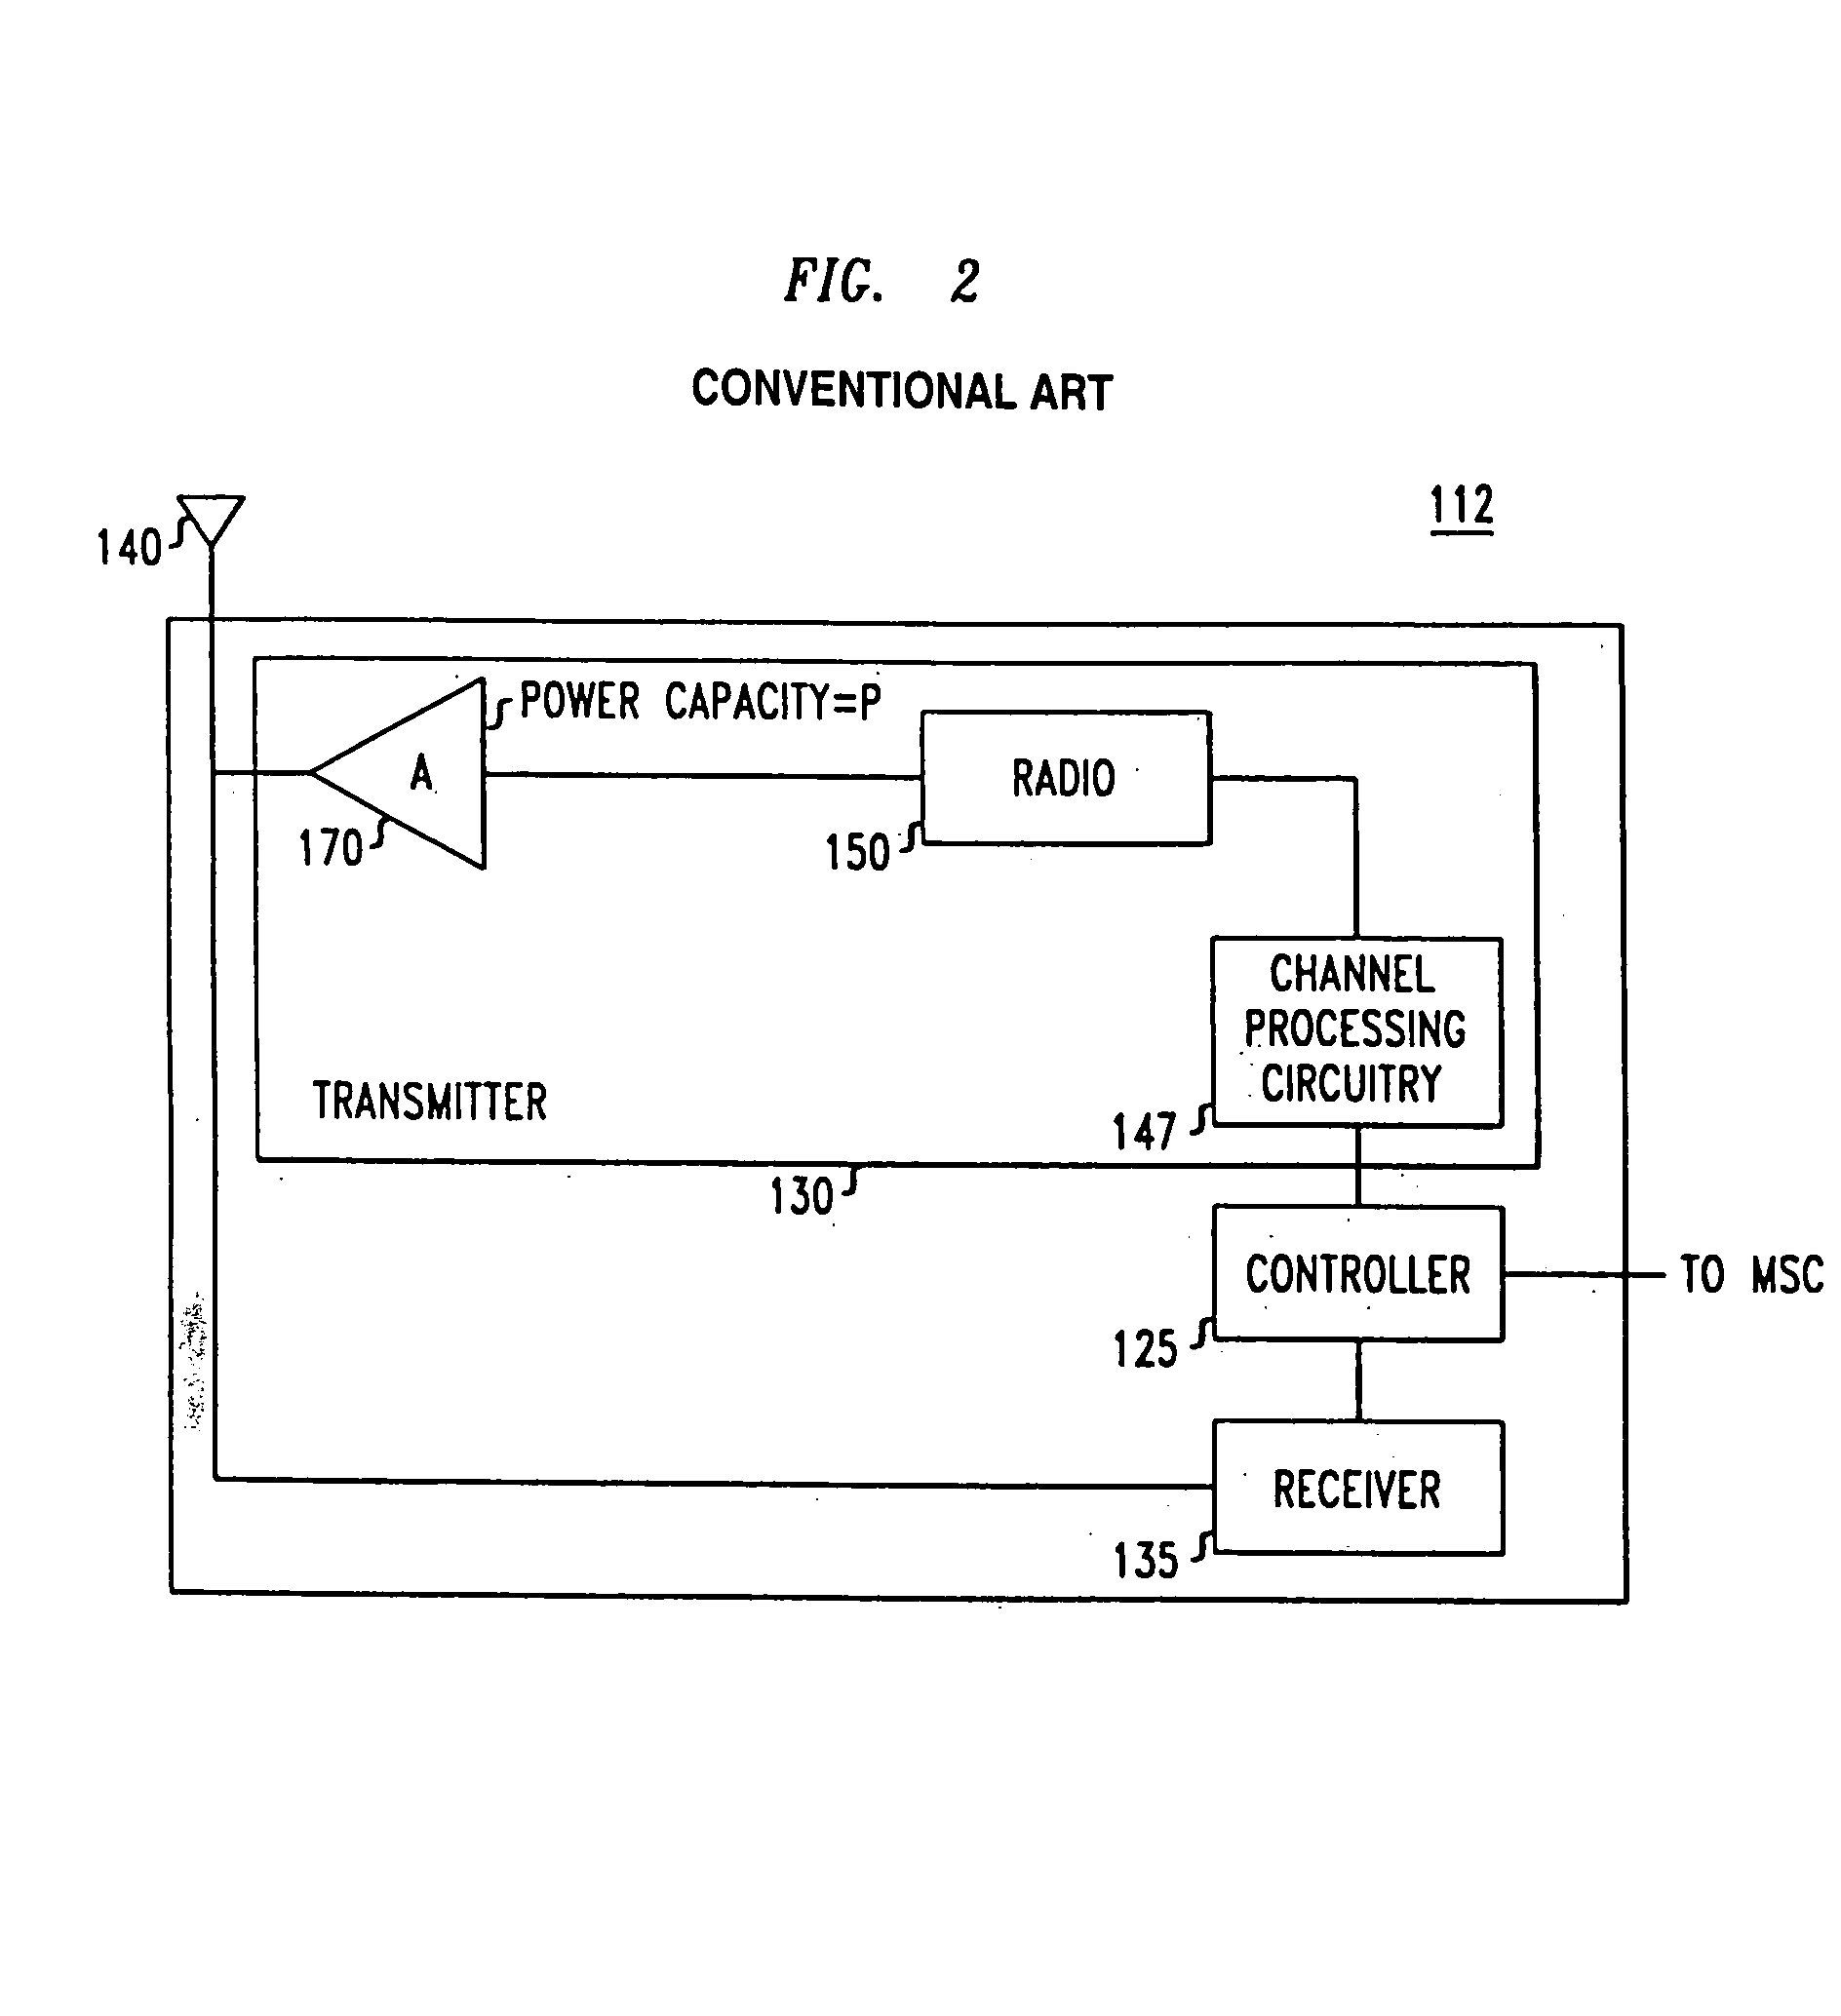 Power amplifier sharing in a wireless communication system with transmit diversity